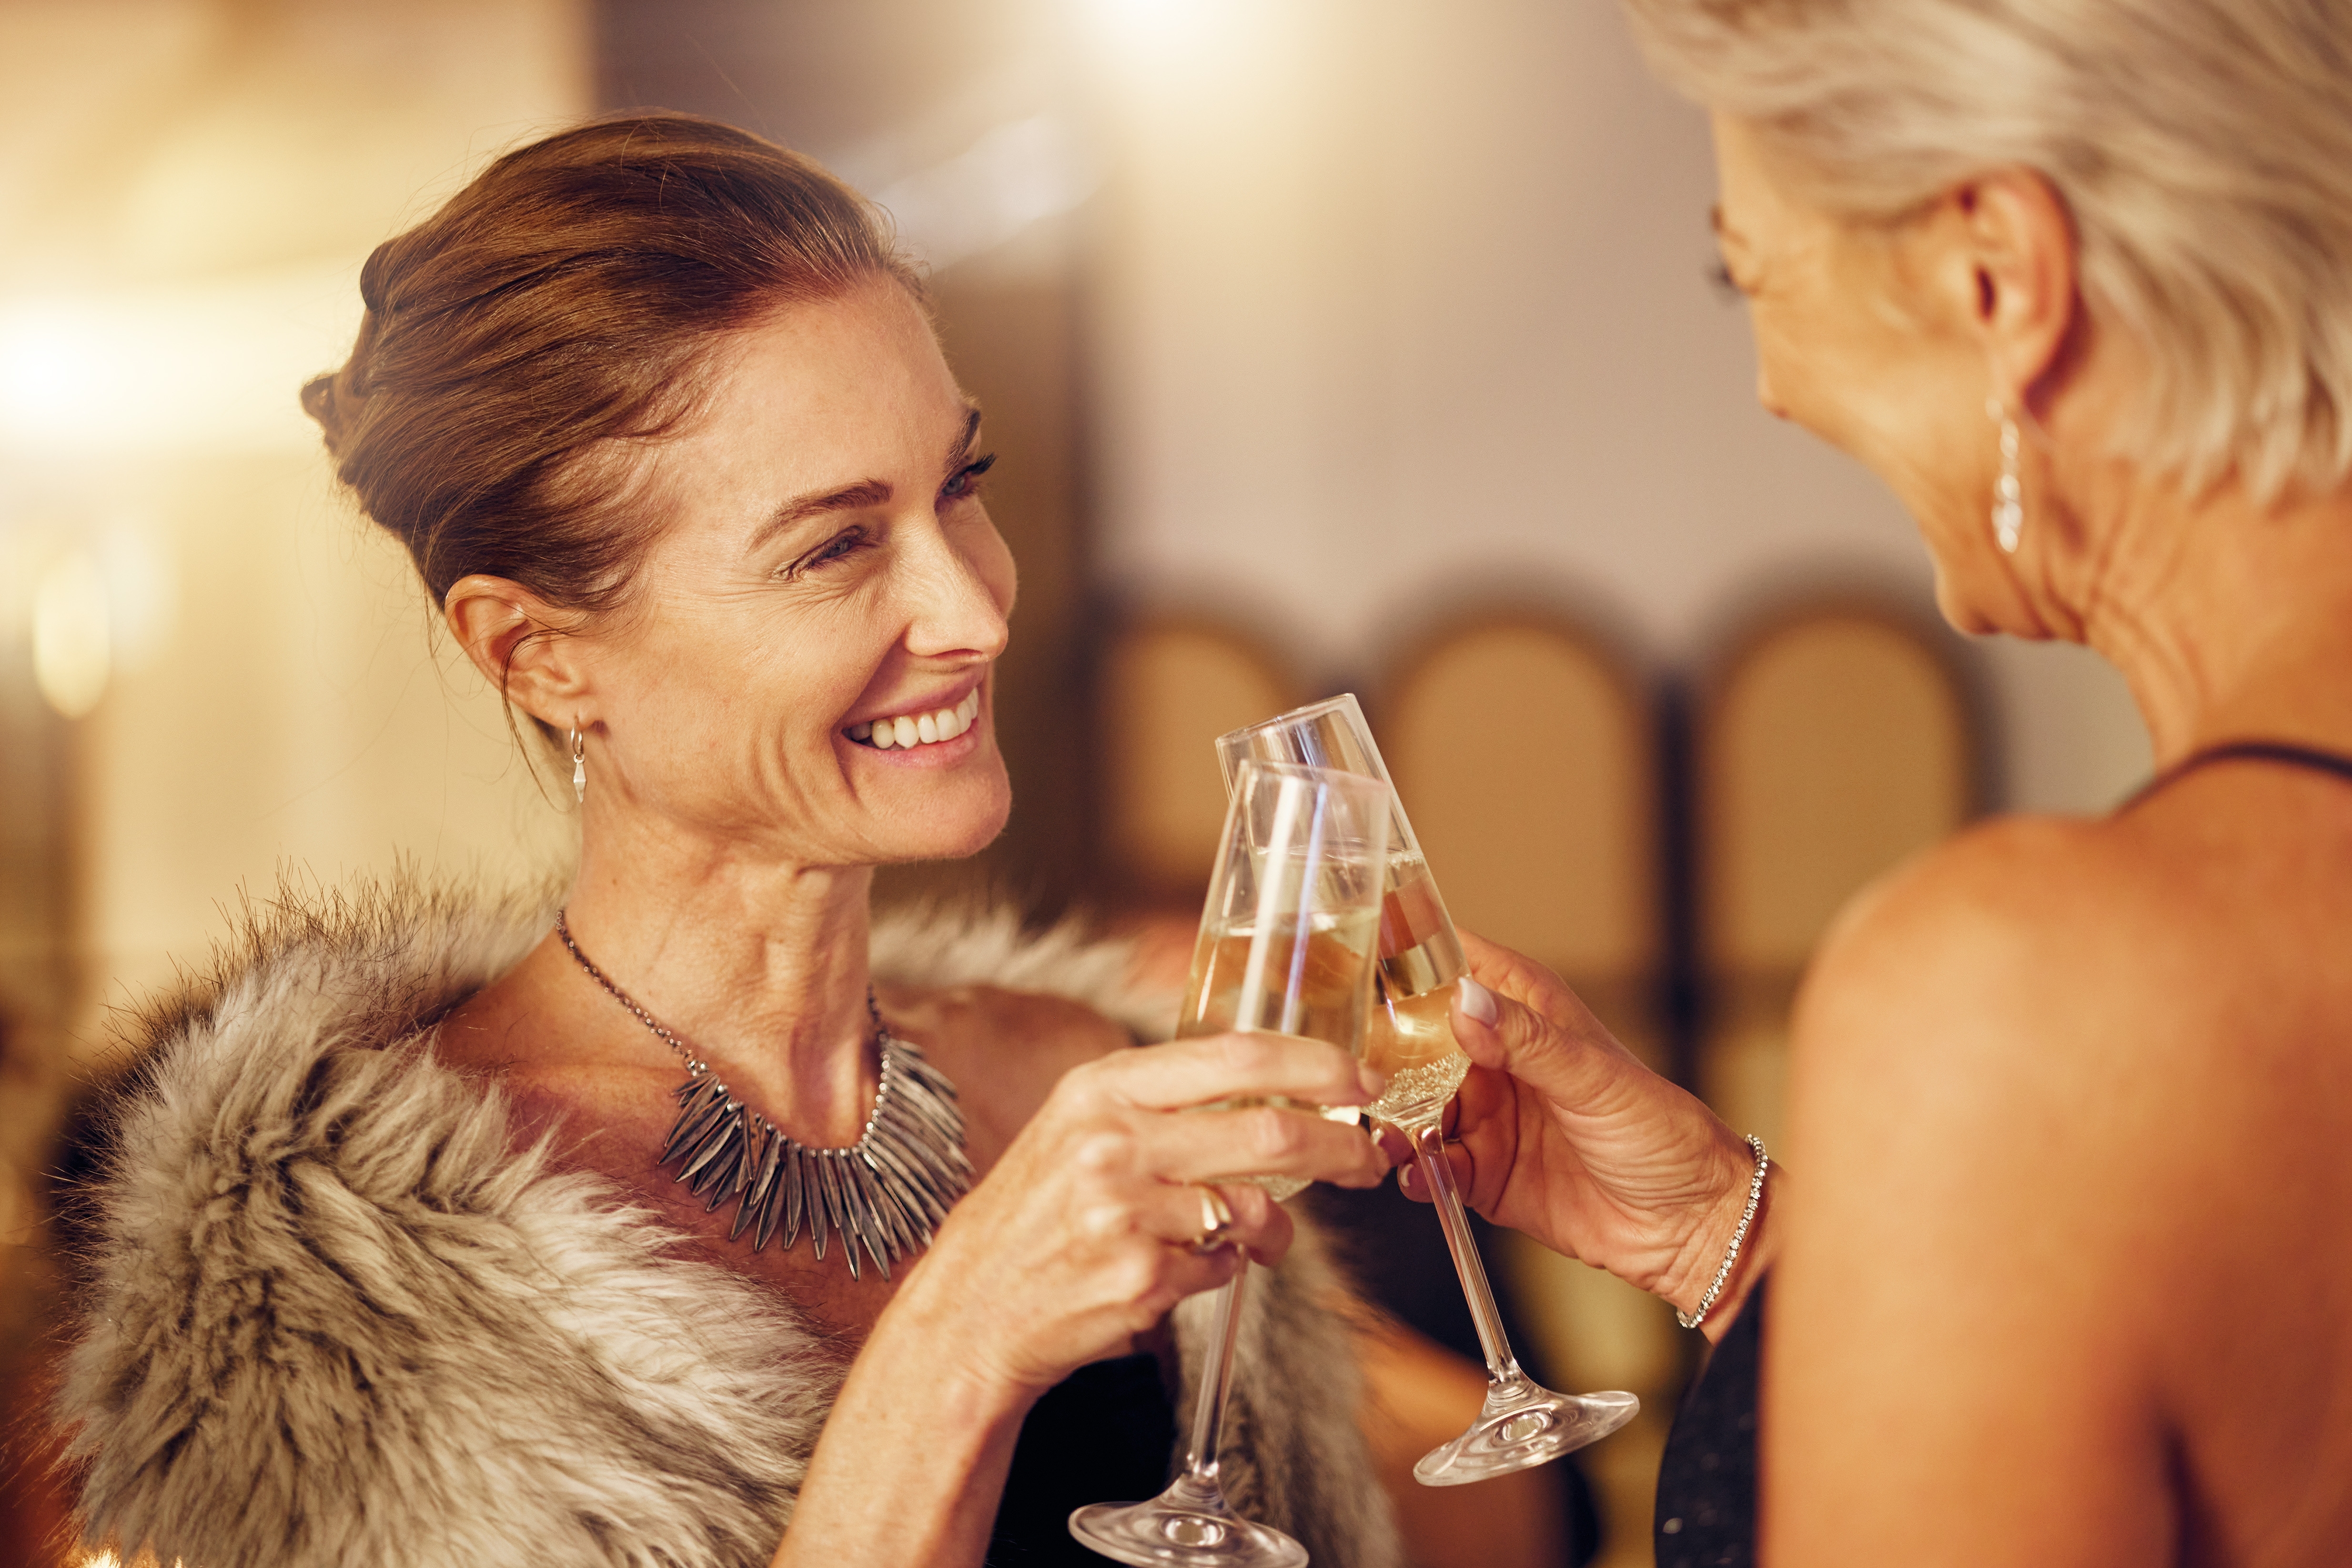 A pair of middle aged woman clink champagne glasses together.